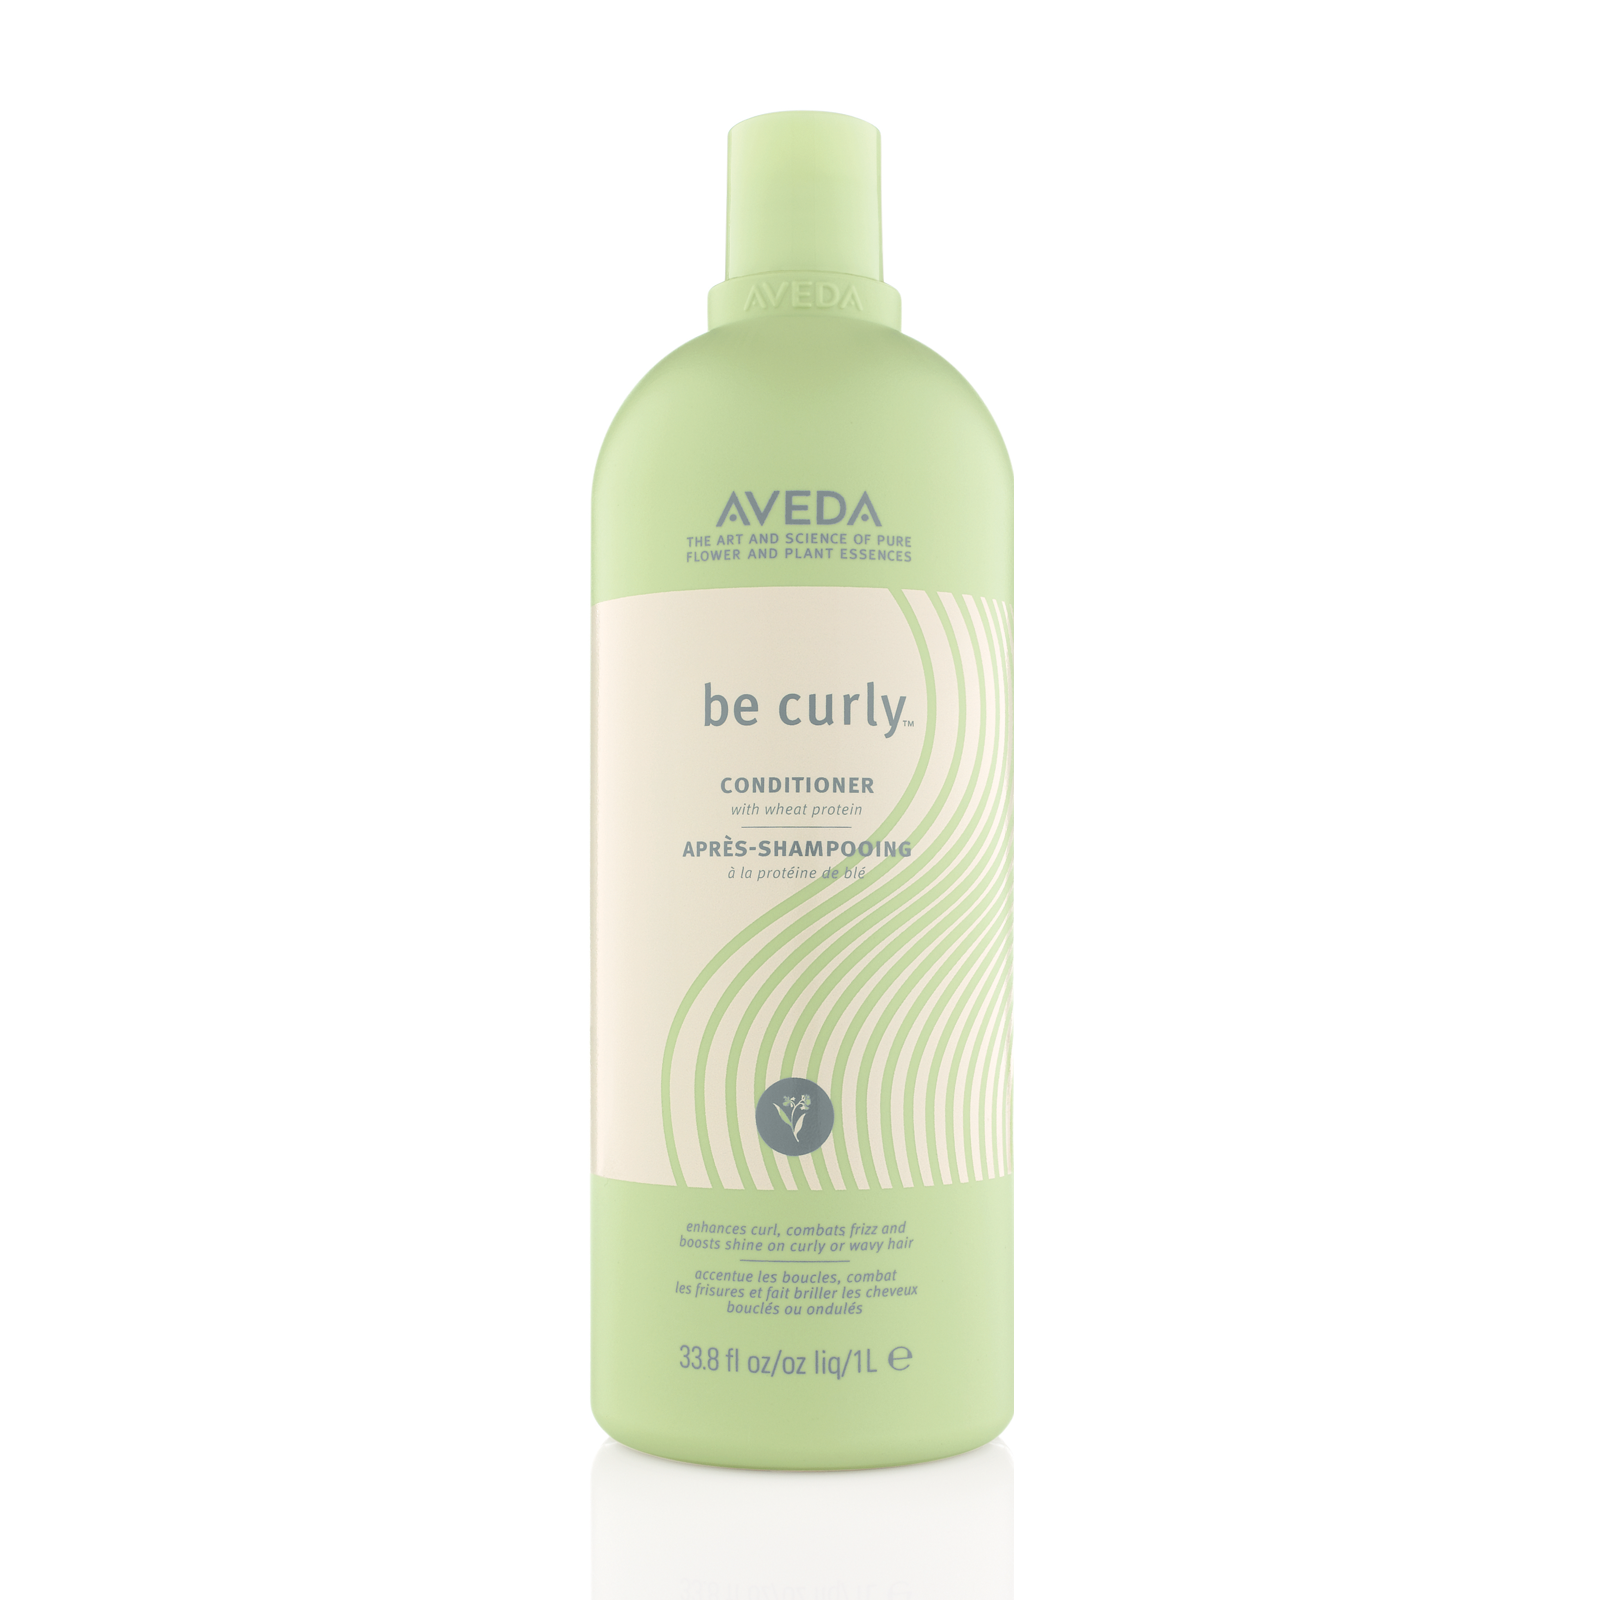 https://av-dashop.nl/wp-content/uploads/2016/02/aveda-be-curly-conditioner-ltr.png